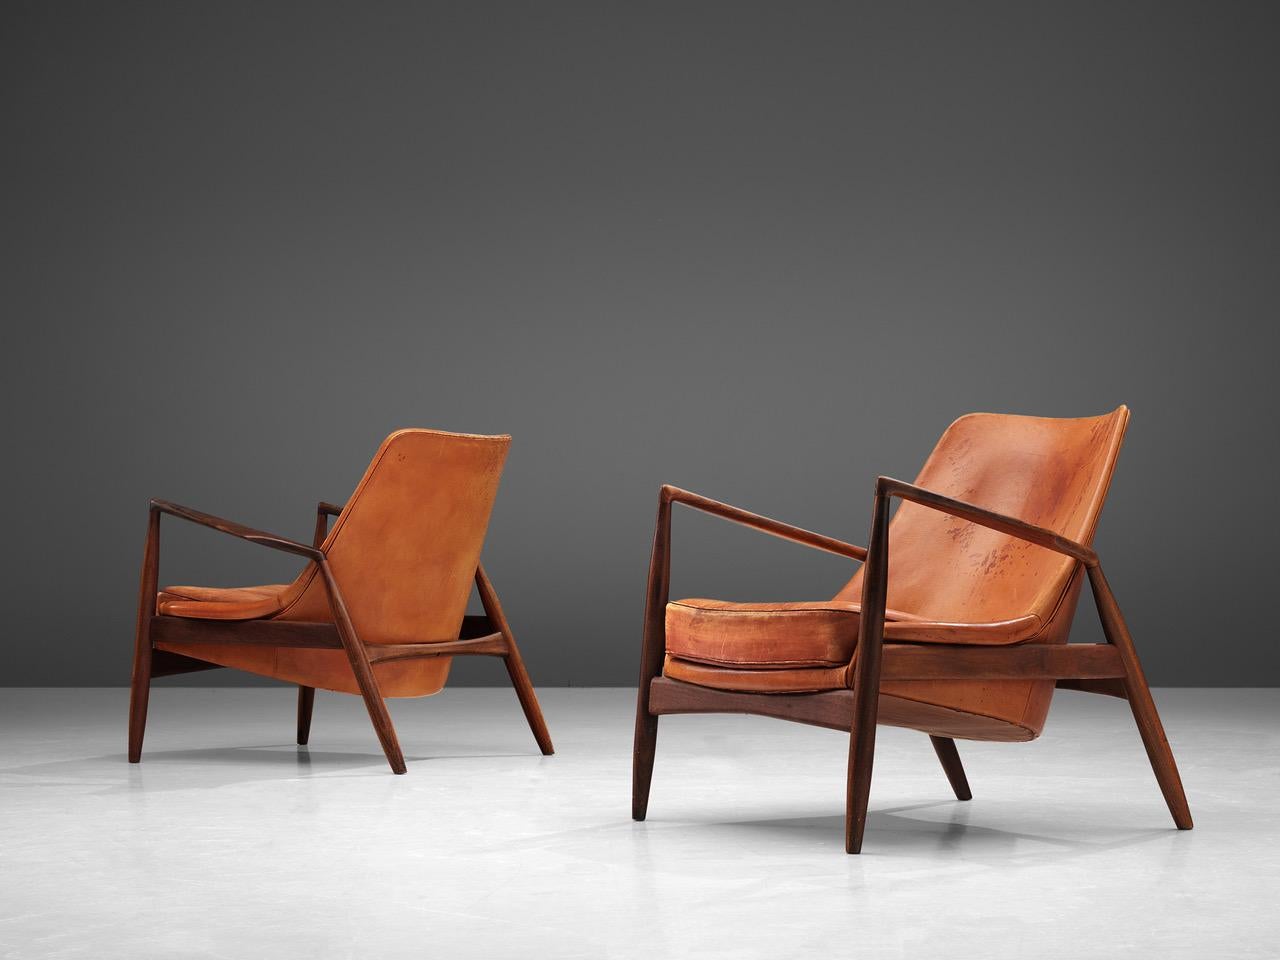 Set of Ib Kofod-Larsen for OPE, 'Sälen' (Seal) lounge chairs model 503-799, teak and leather, Sweden, 1956. 

Iconic pair of 'Seal' lounge chairs by Ib Kofod-Larsen. The well-crafted frame of these chairs are made of teak. It shows very nice